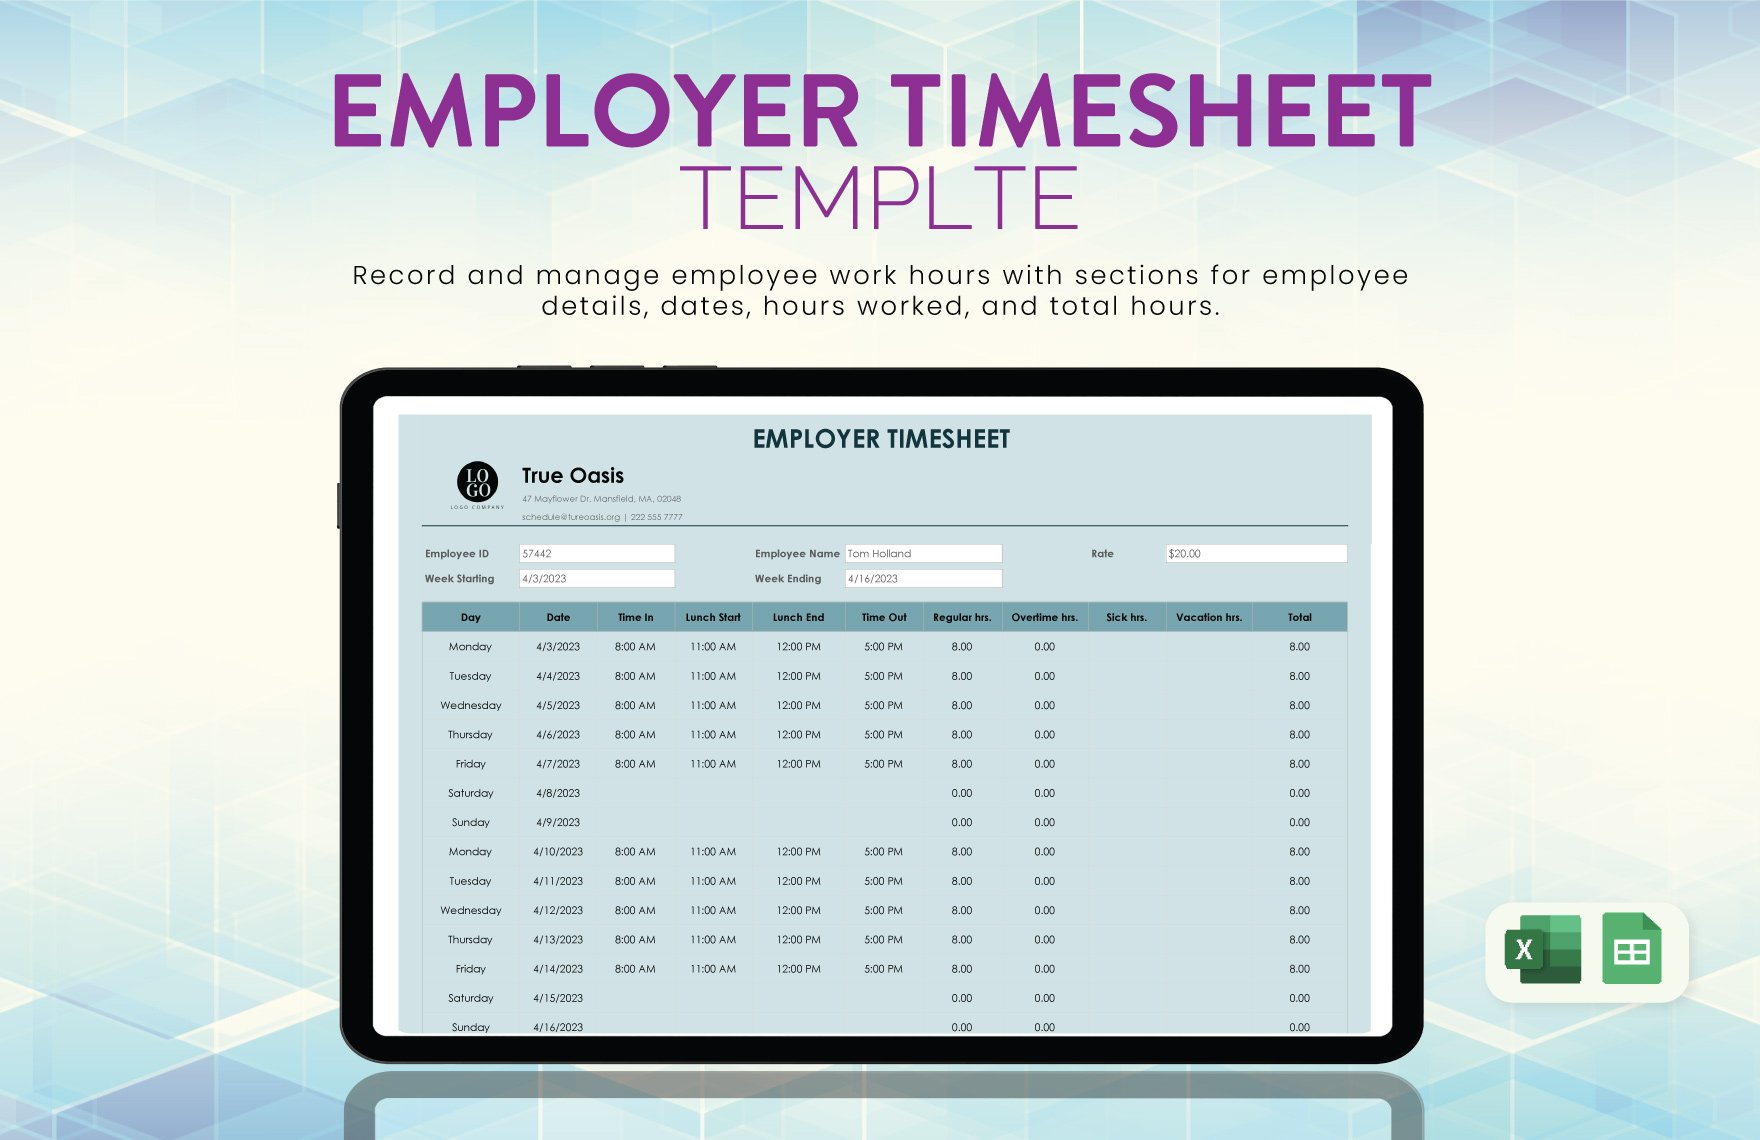 Employer Timesheet in Excel, Google Sheets